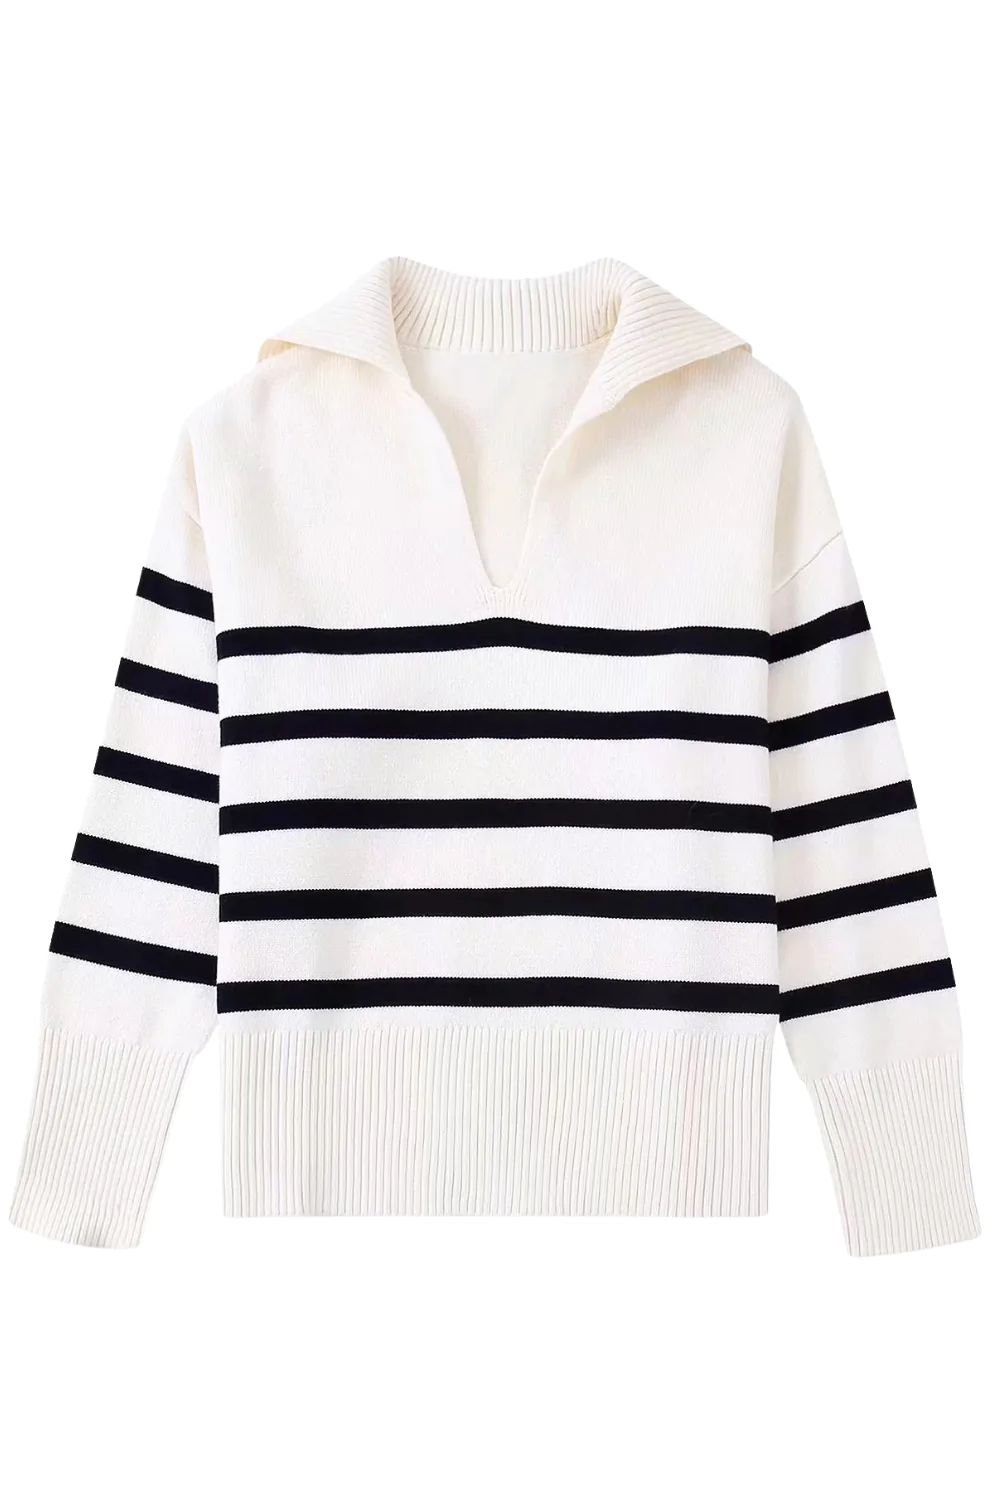 'Quina' Collared Striped Sweater (2 Colors) | Goodnight Macaroon